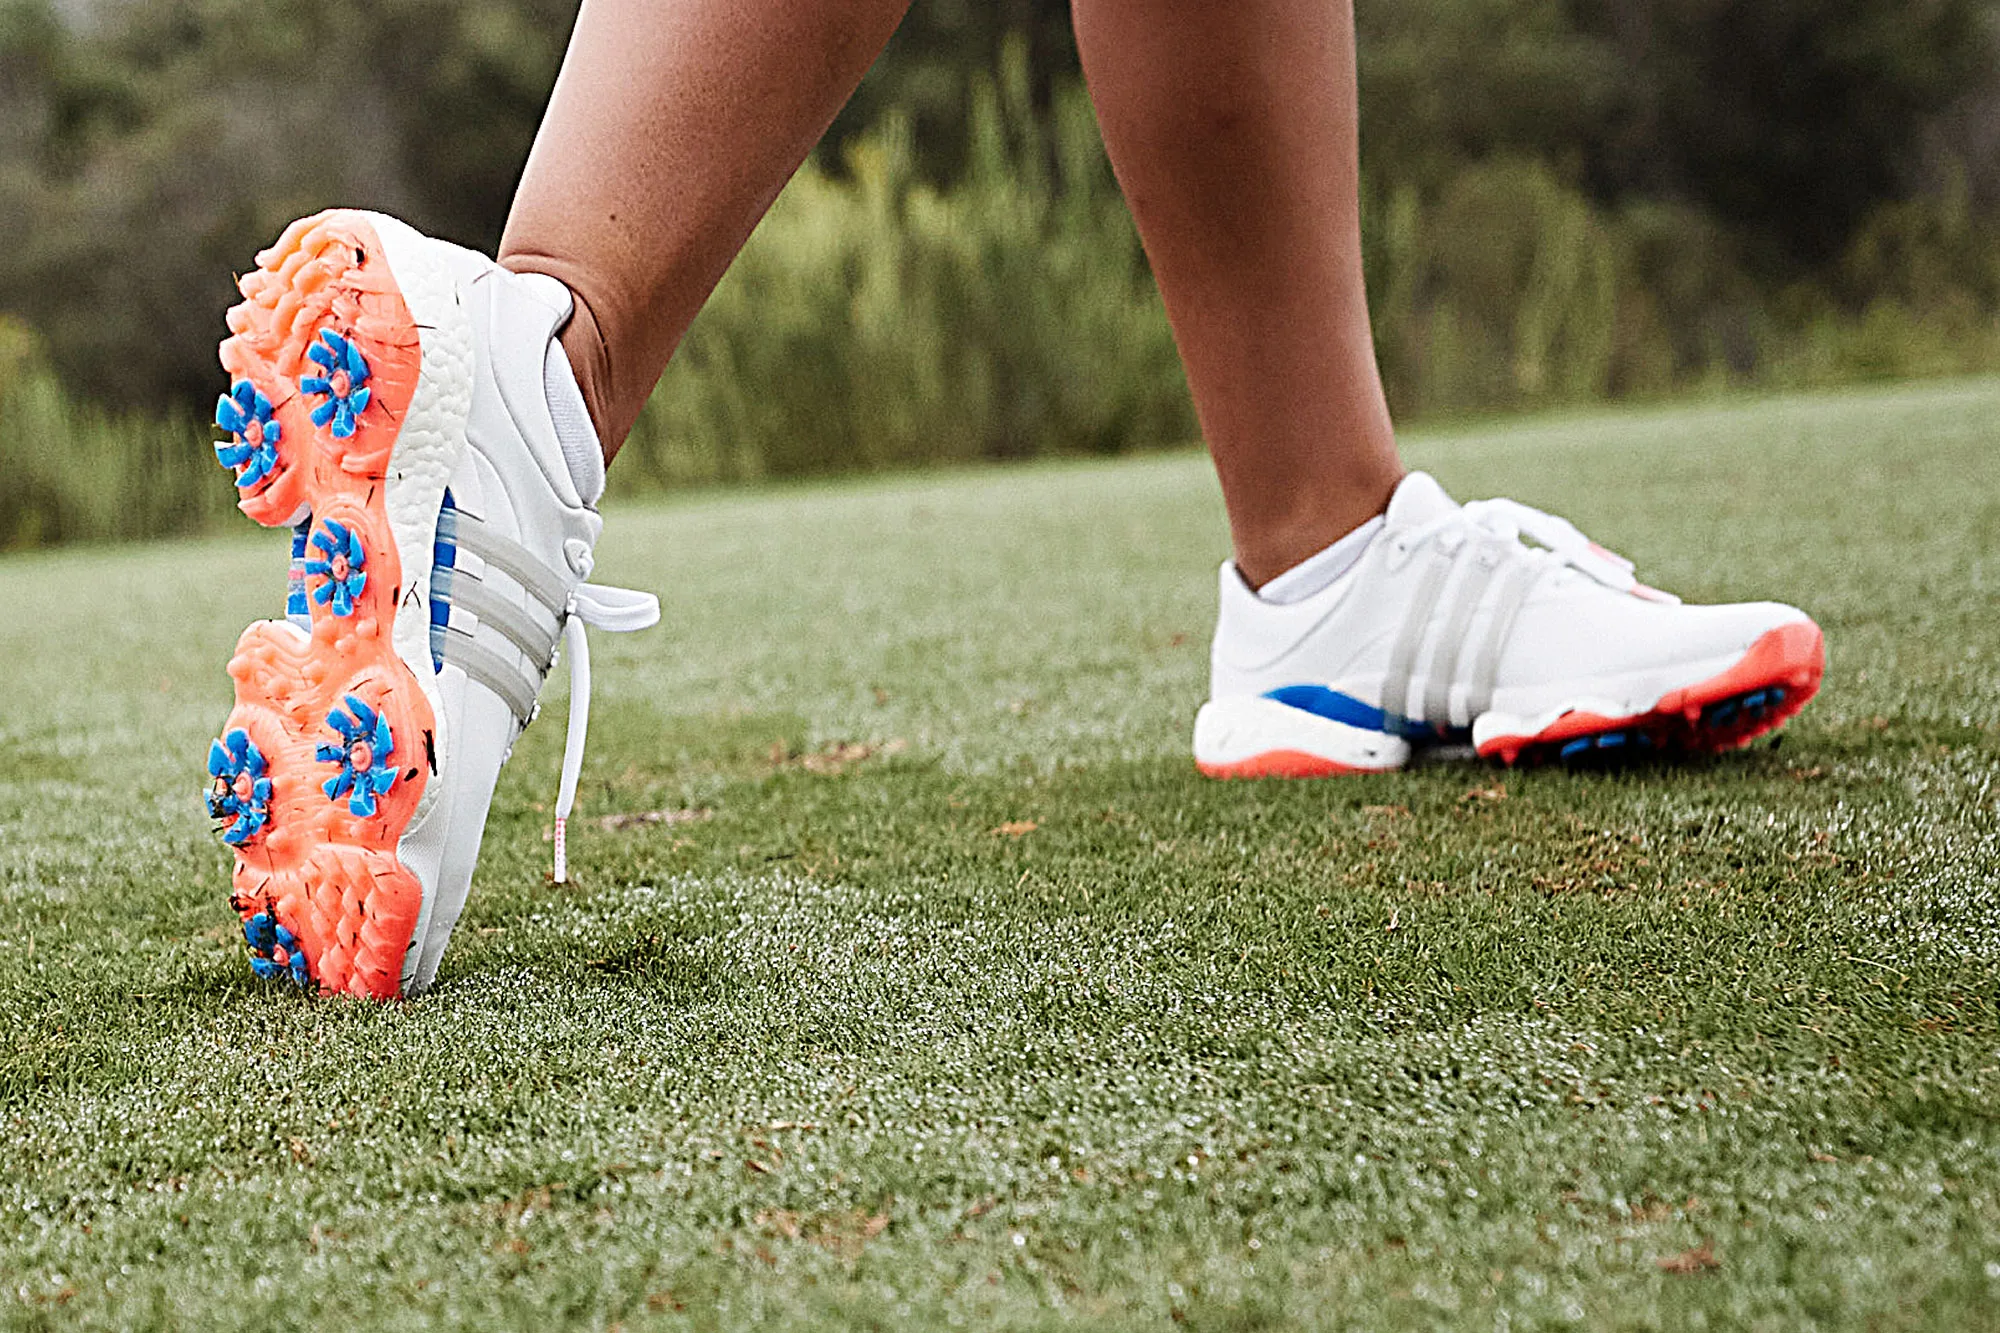 Buyer's Guide: Buy the brand new Adidas Tour360 '22 Shoes from American Golf